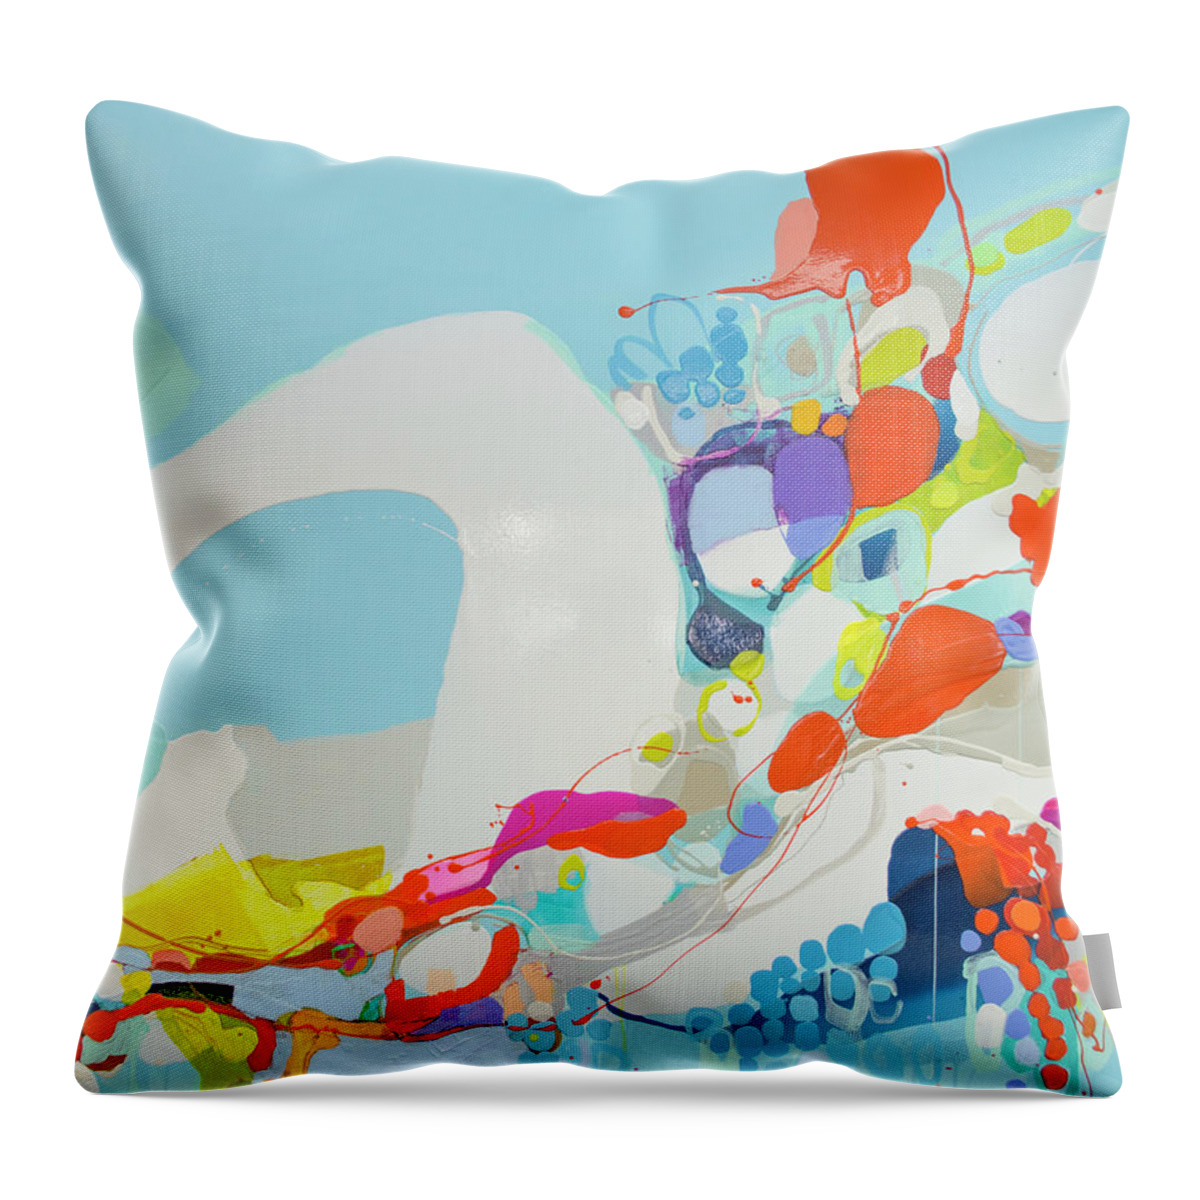 Abstract Throw Pillow featuring the painting When Alexa Moved In by Claire Desjardins